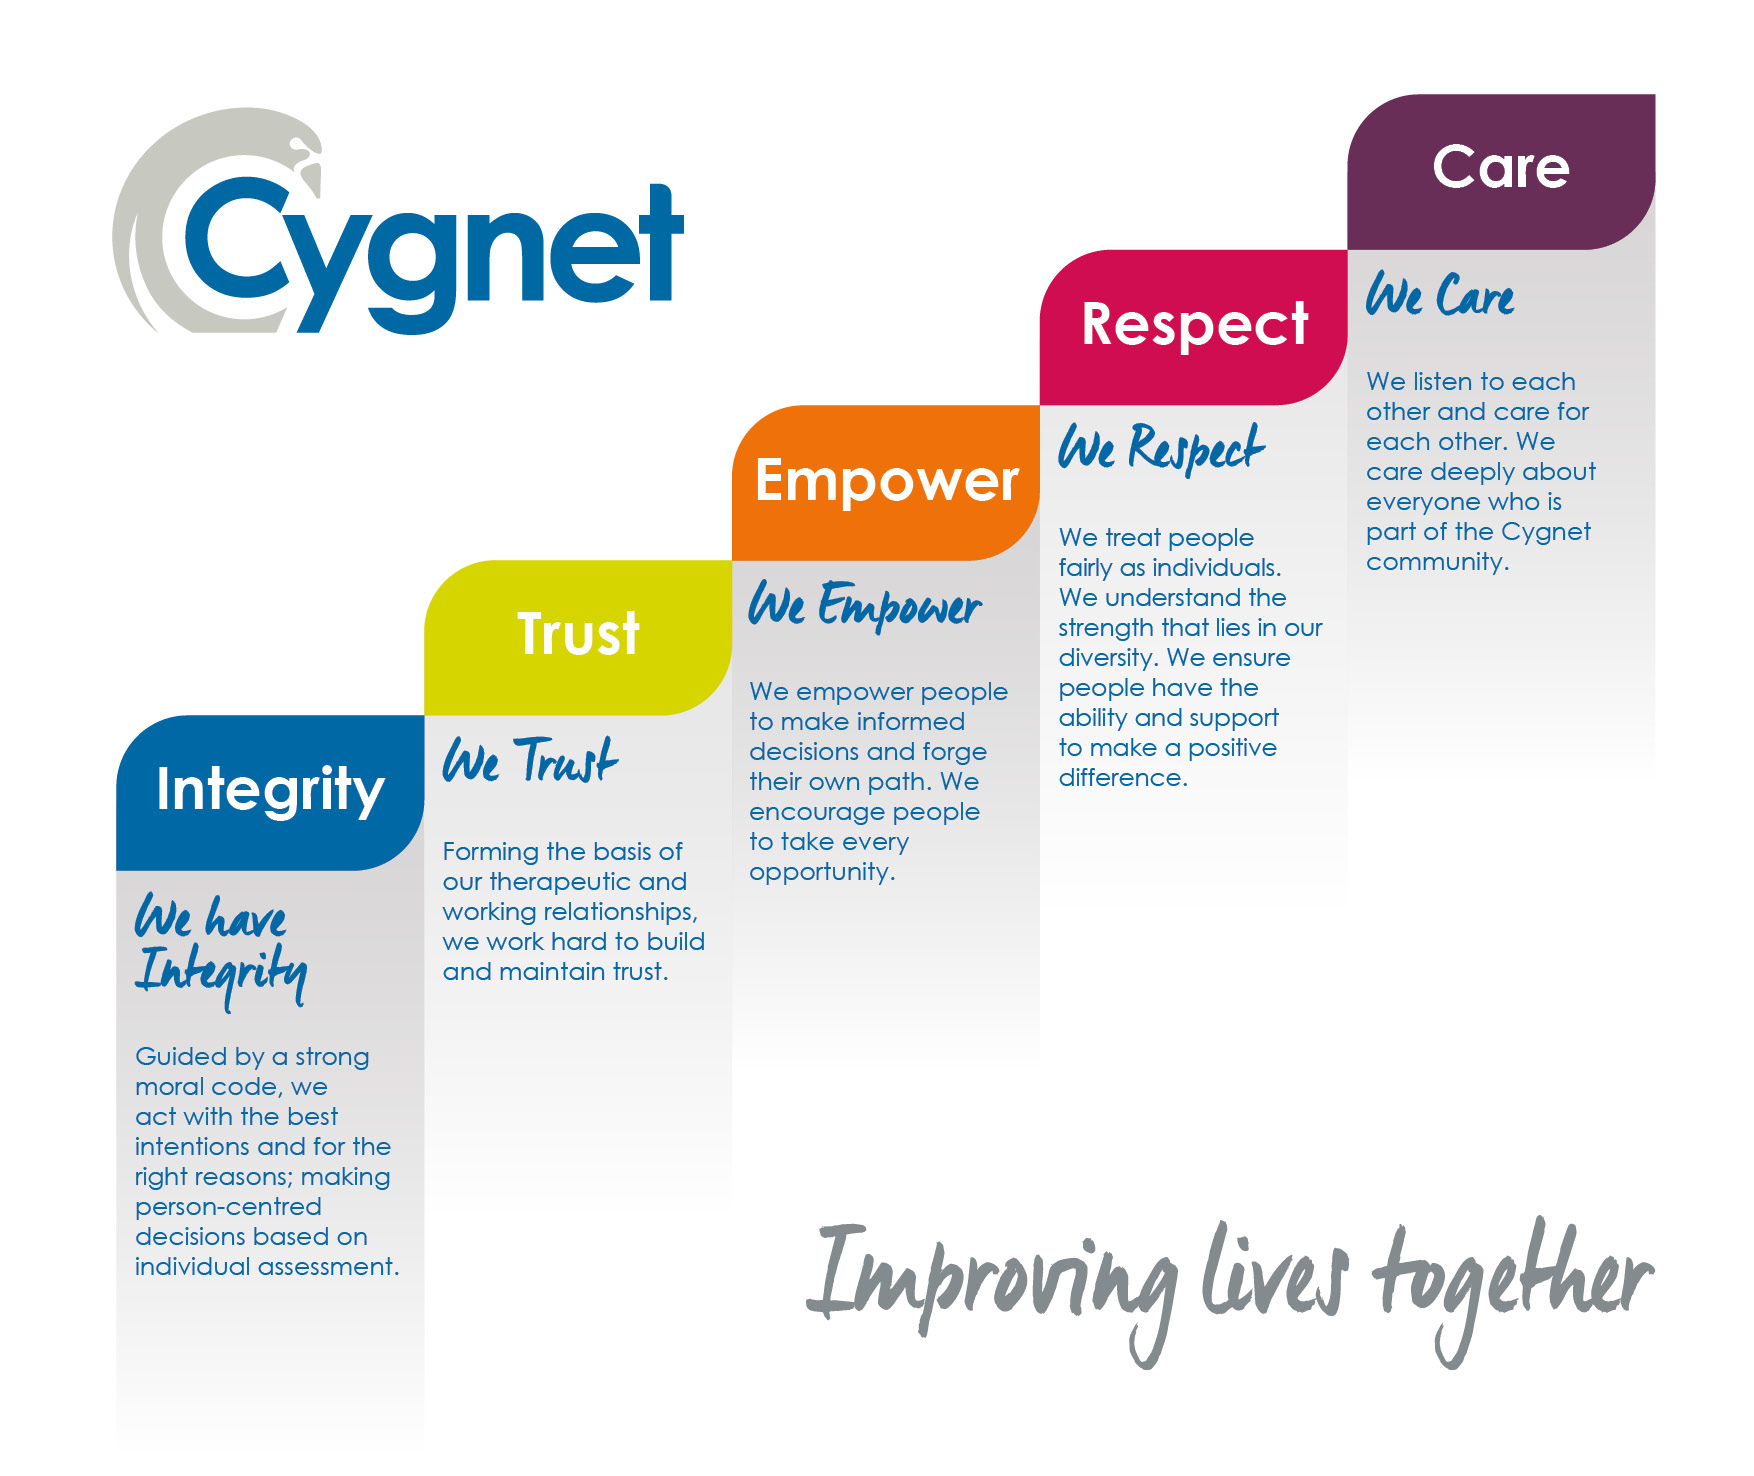 Our Cygnet Values - Integrity, Trust, Empower, Respect and Care